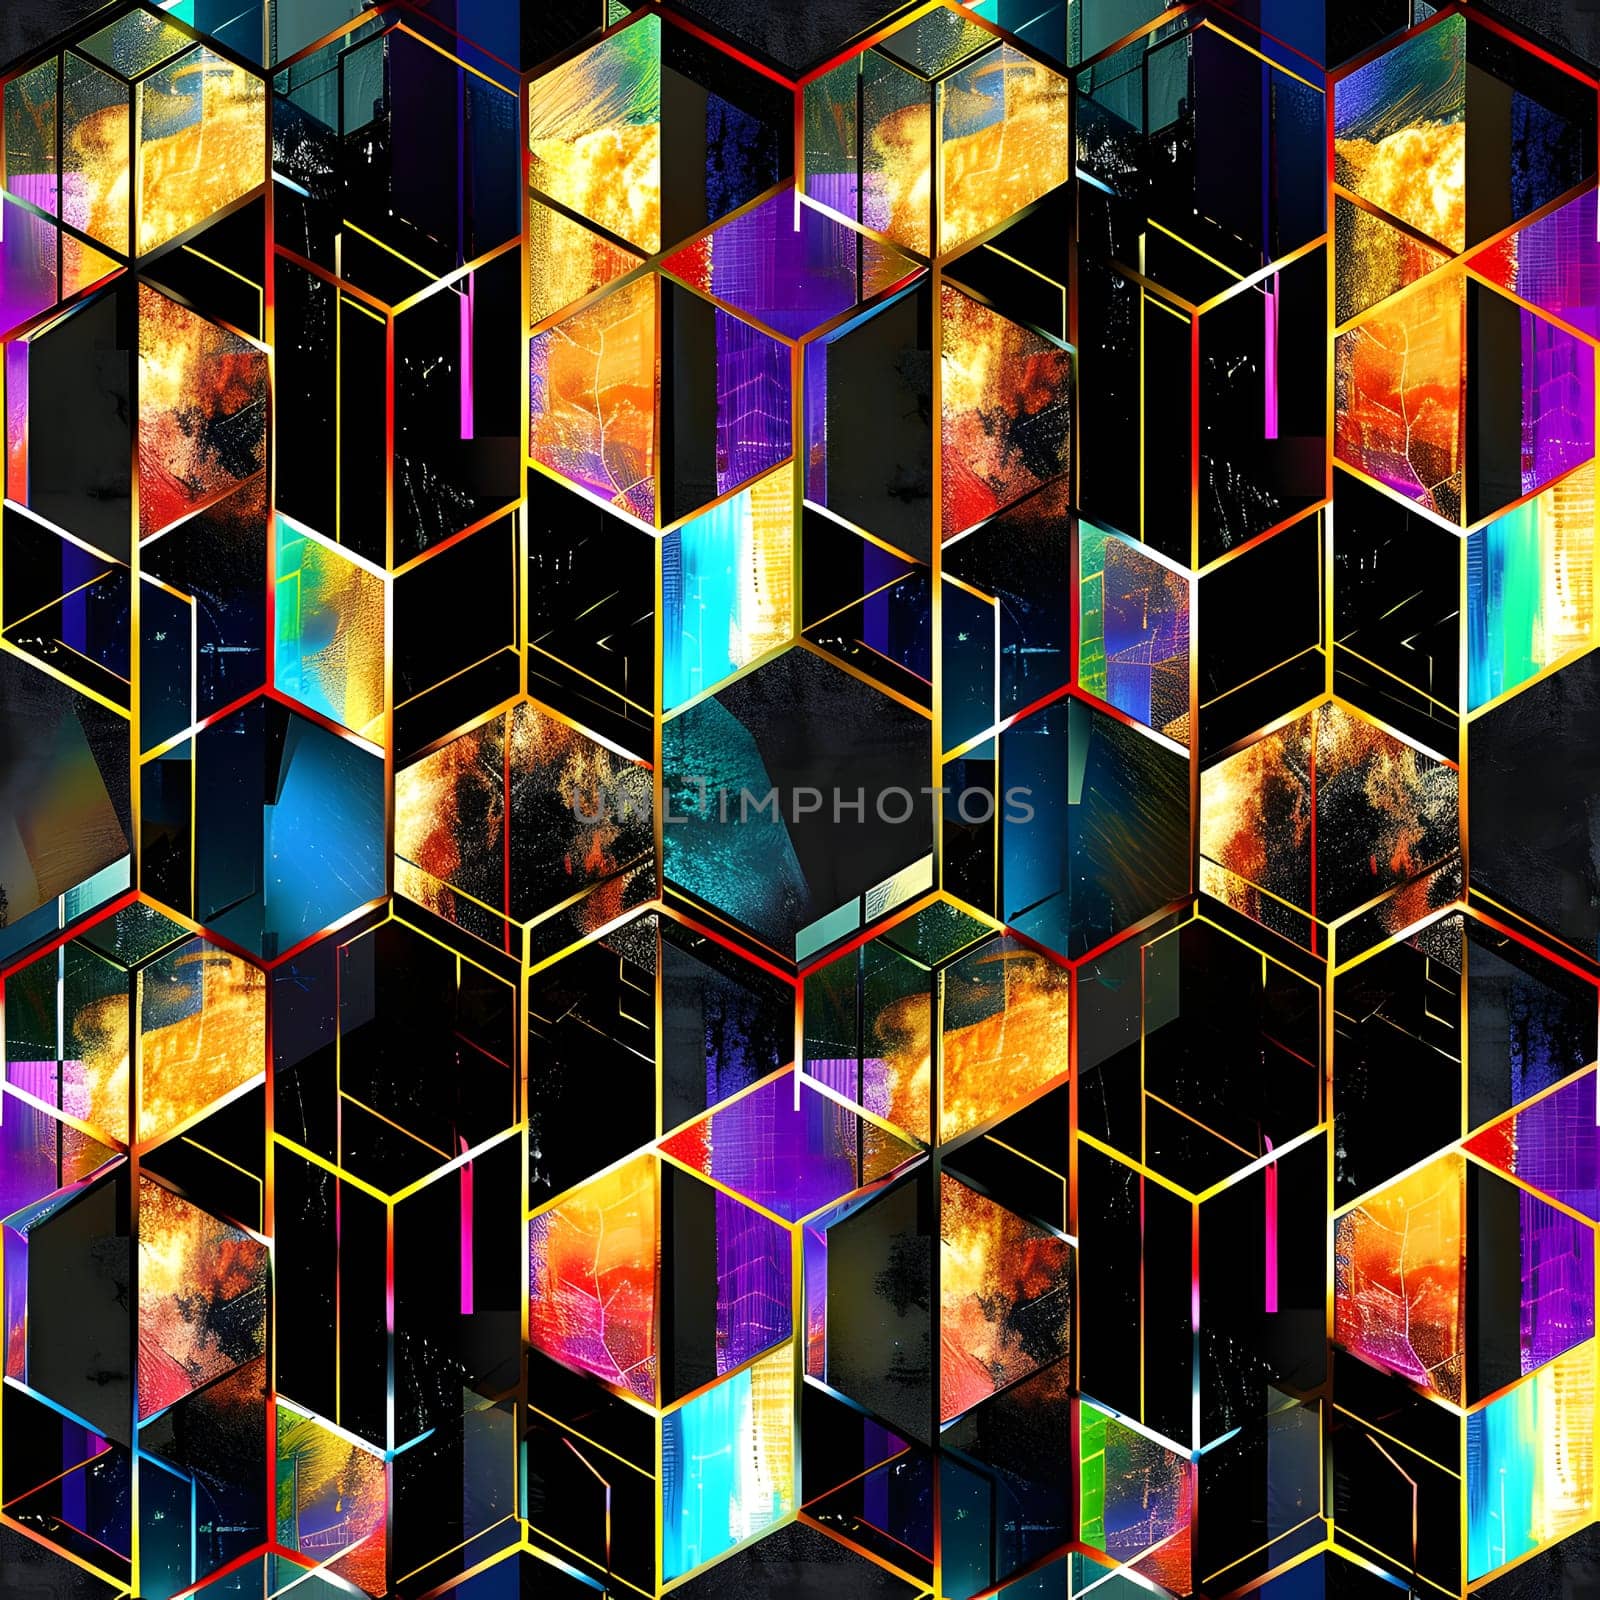 Seamless texture and full-frame background of colorful glass mosaic triangular tiles. Neural network generated image. Not based on any actual scene or pattern.